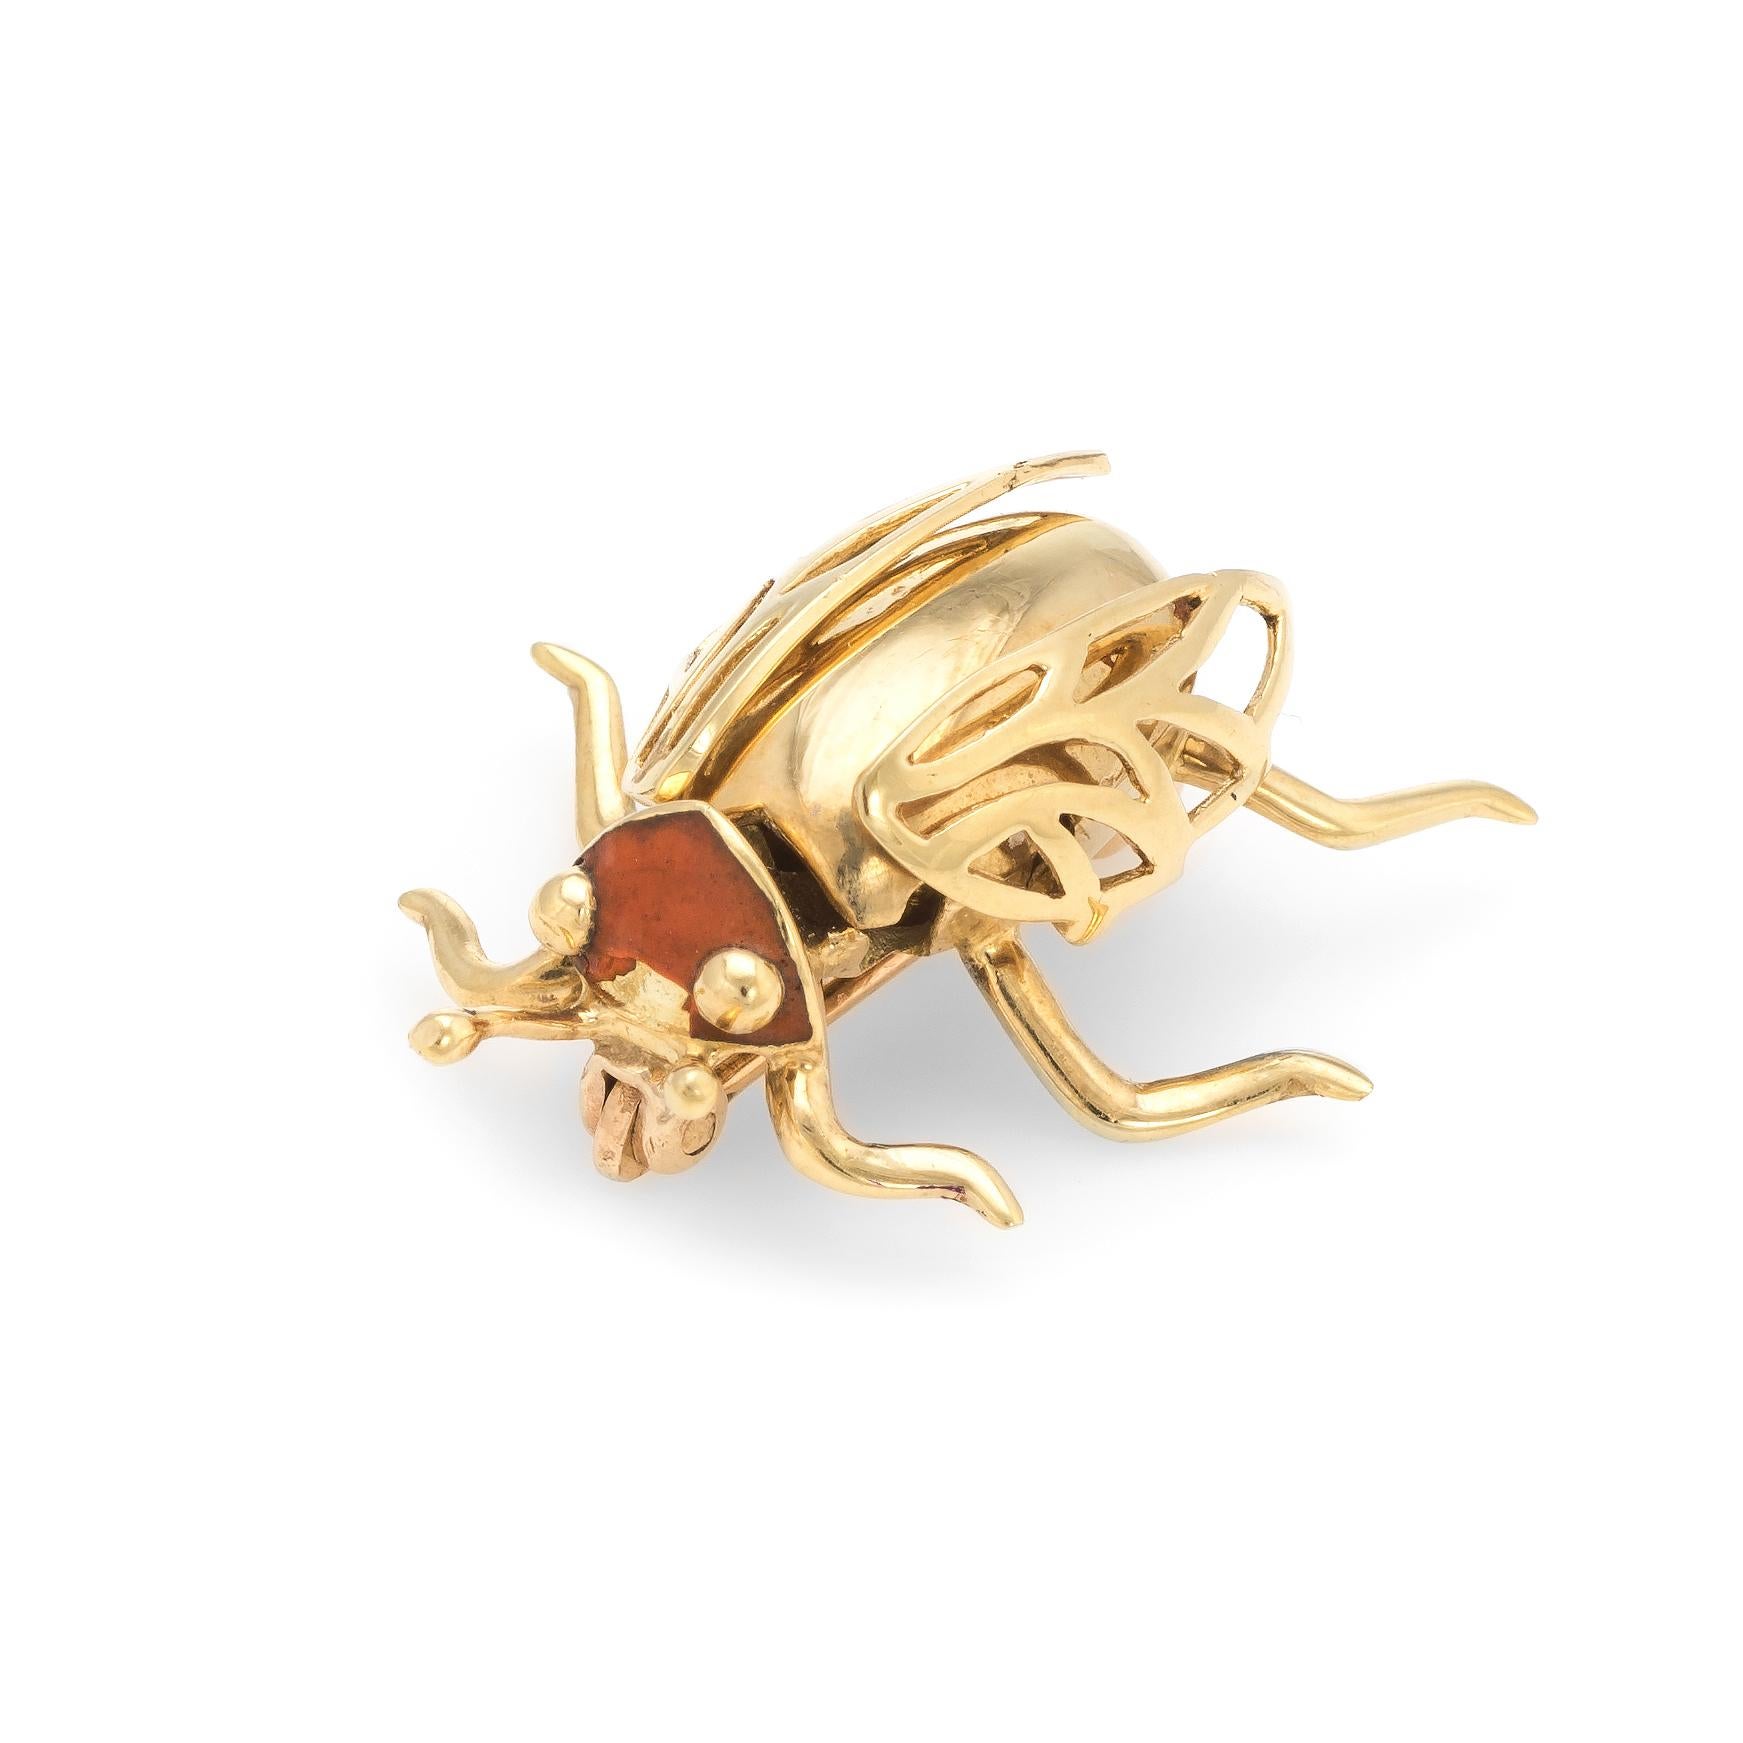 Finely detailed vintage beetle bug brooch, crafted in 14 karat yellow gold.

The bug features movable golden wings.

The head is set with orange enamel. Note: chip to enamel.

The brooch is in good condition.

Particulars:

Weight: 5.2